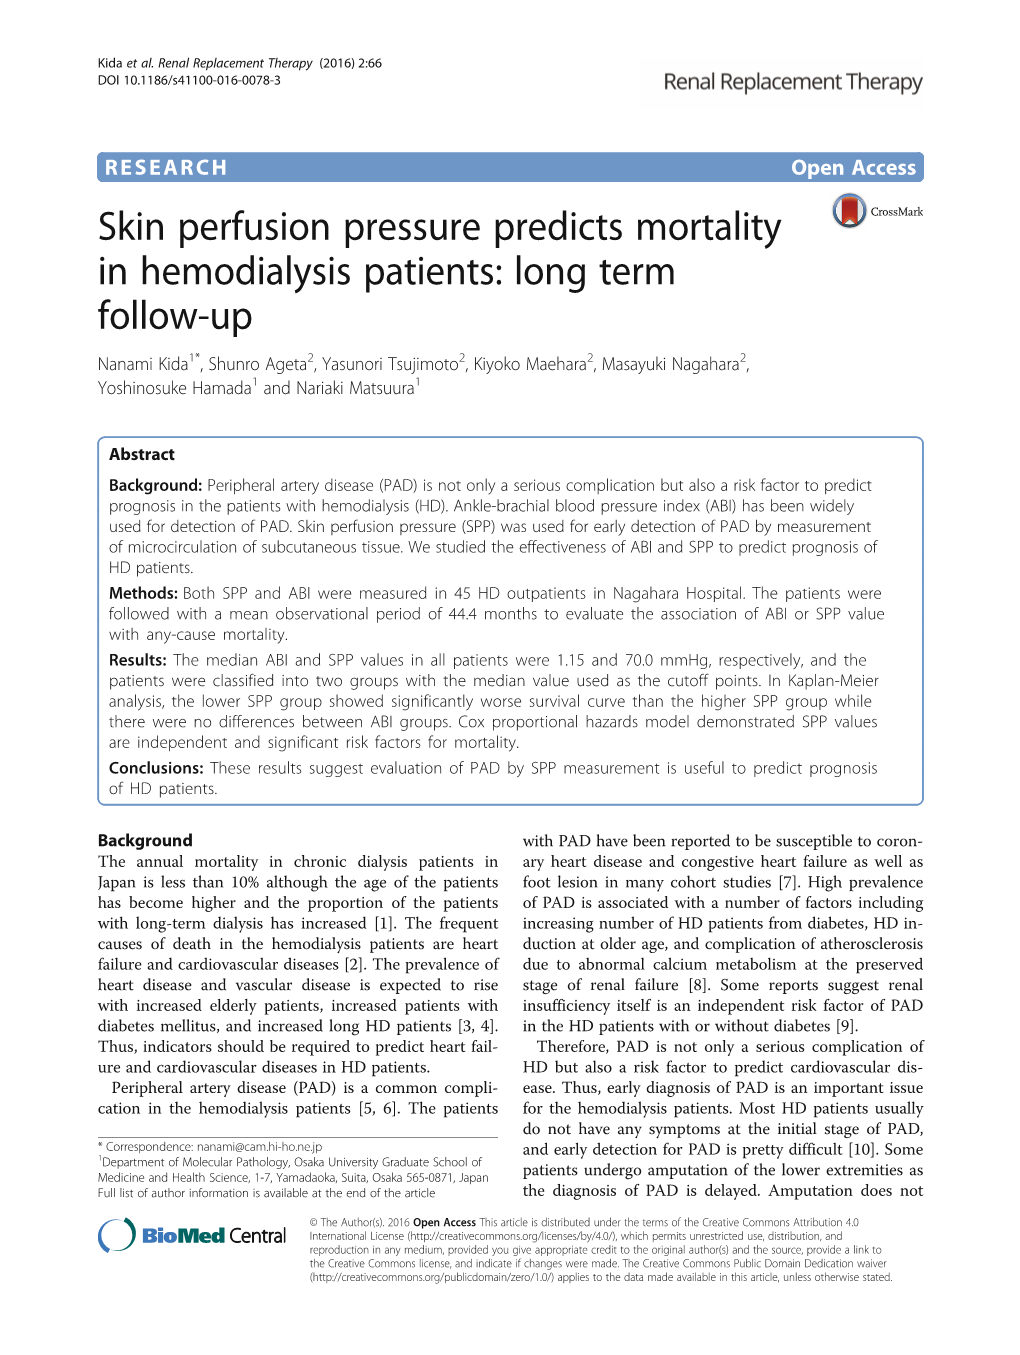 Skin Perfusion Pressure Predicts Mortality in Hemodialysis Patients